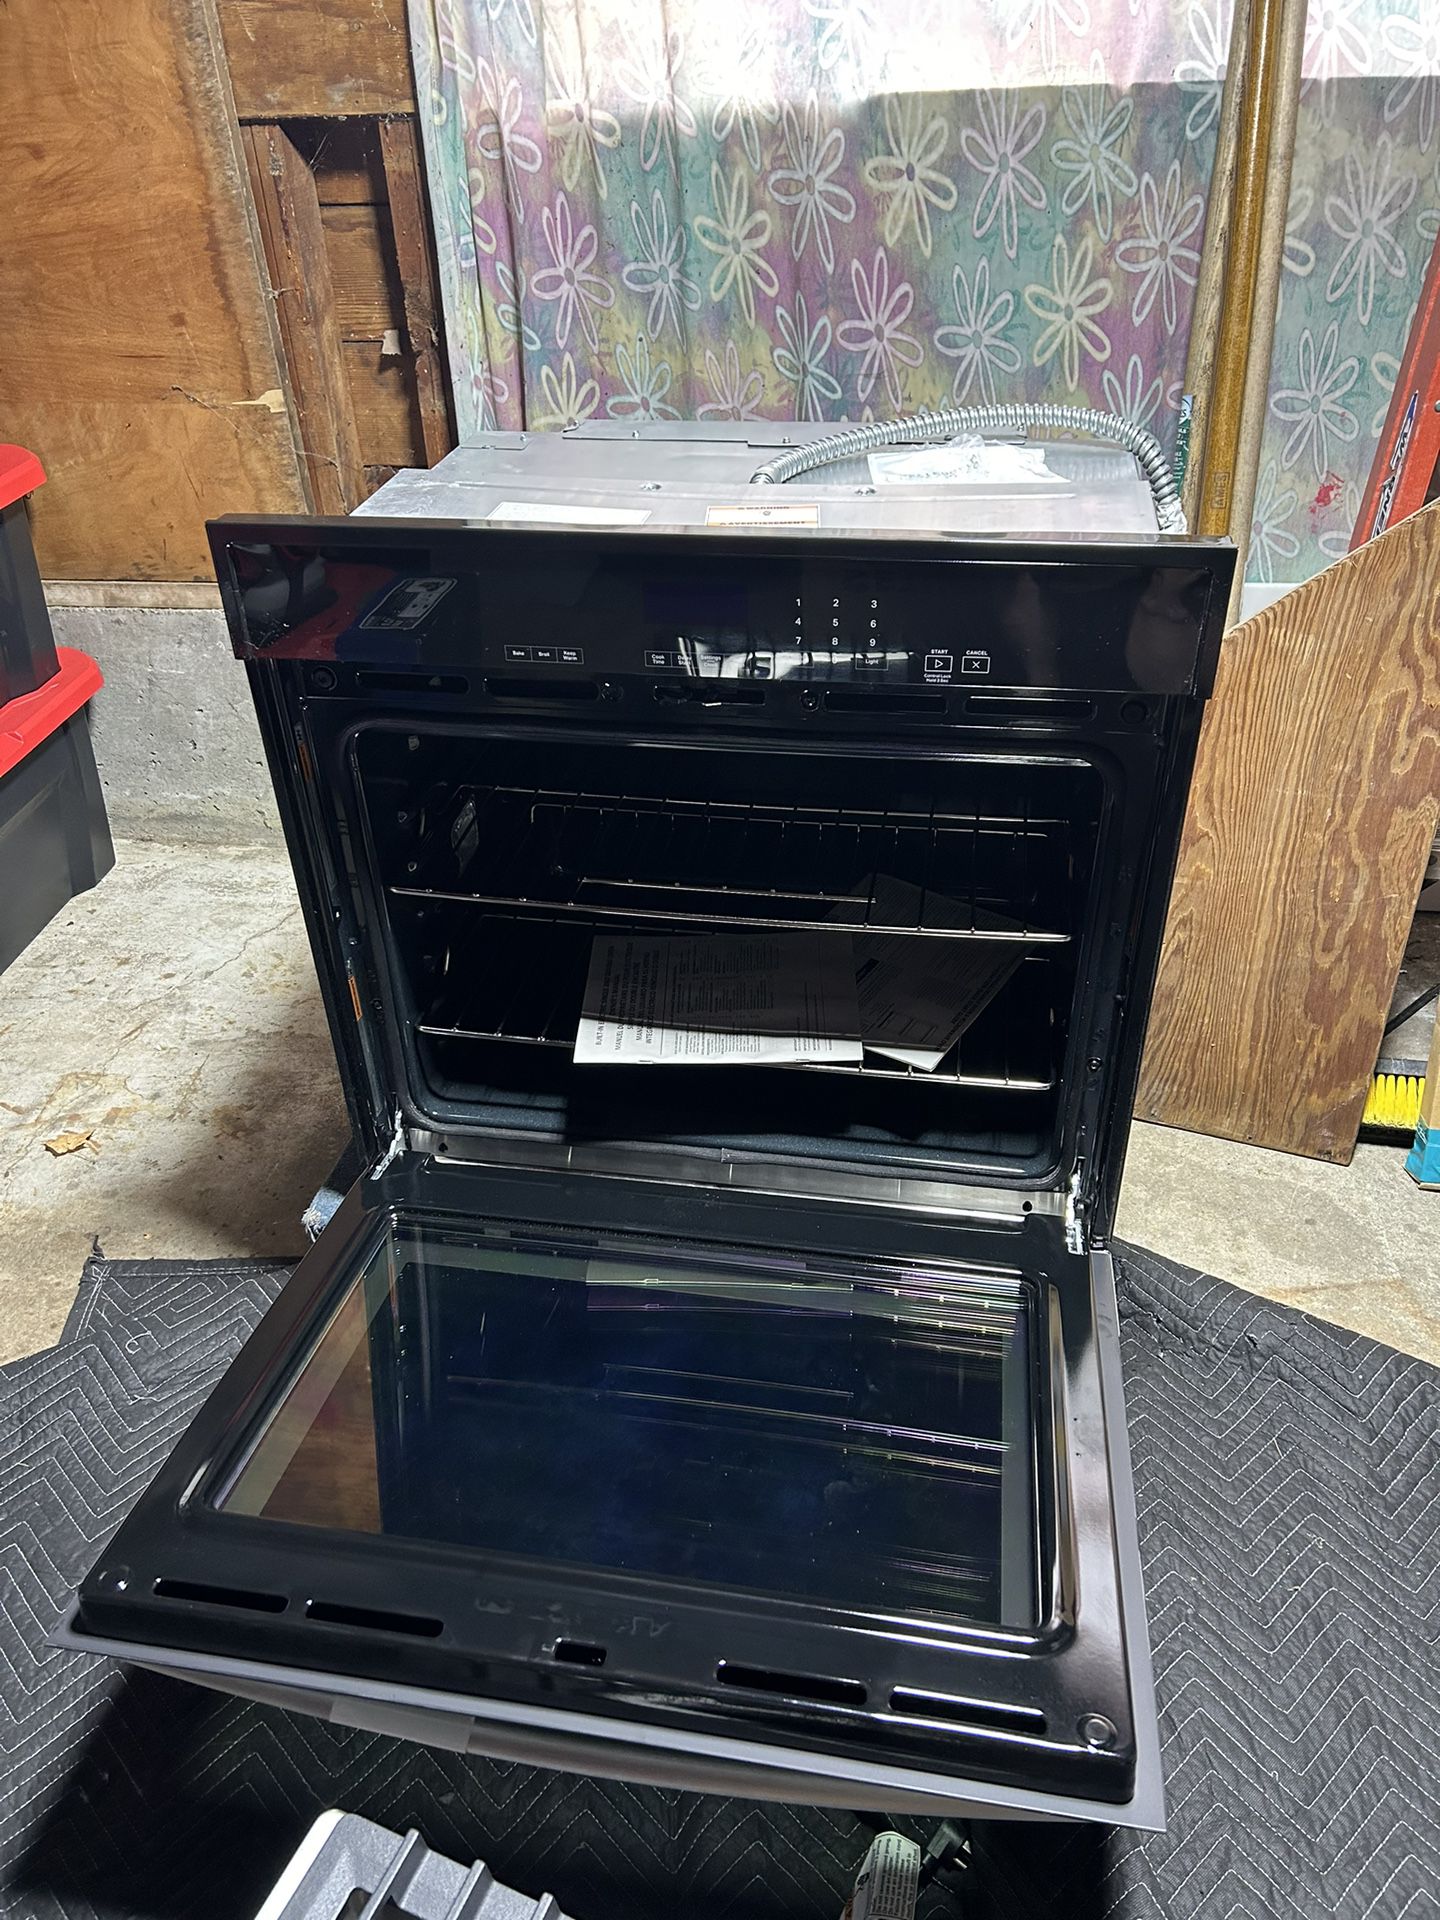 Whirlpool In Cabinet Oven